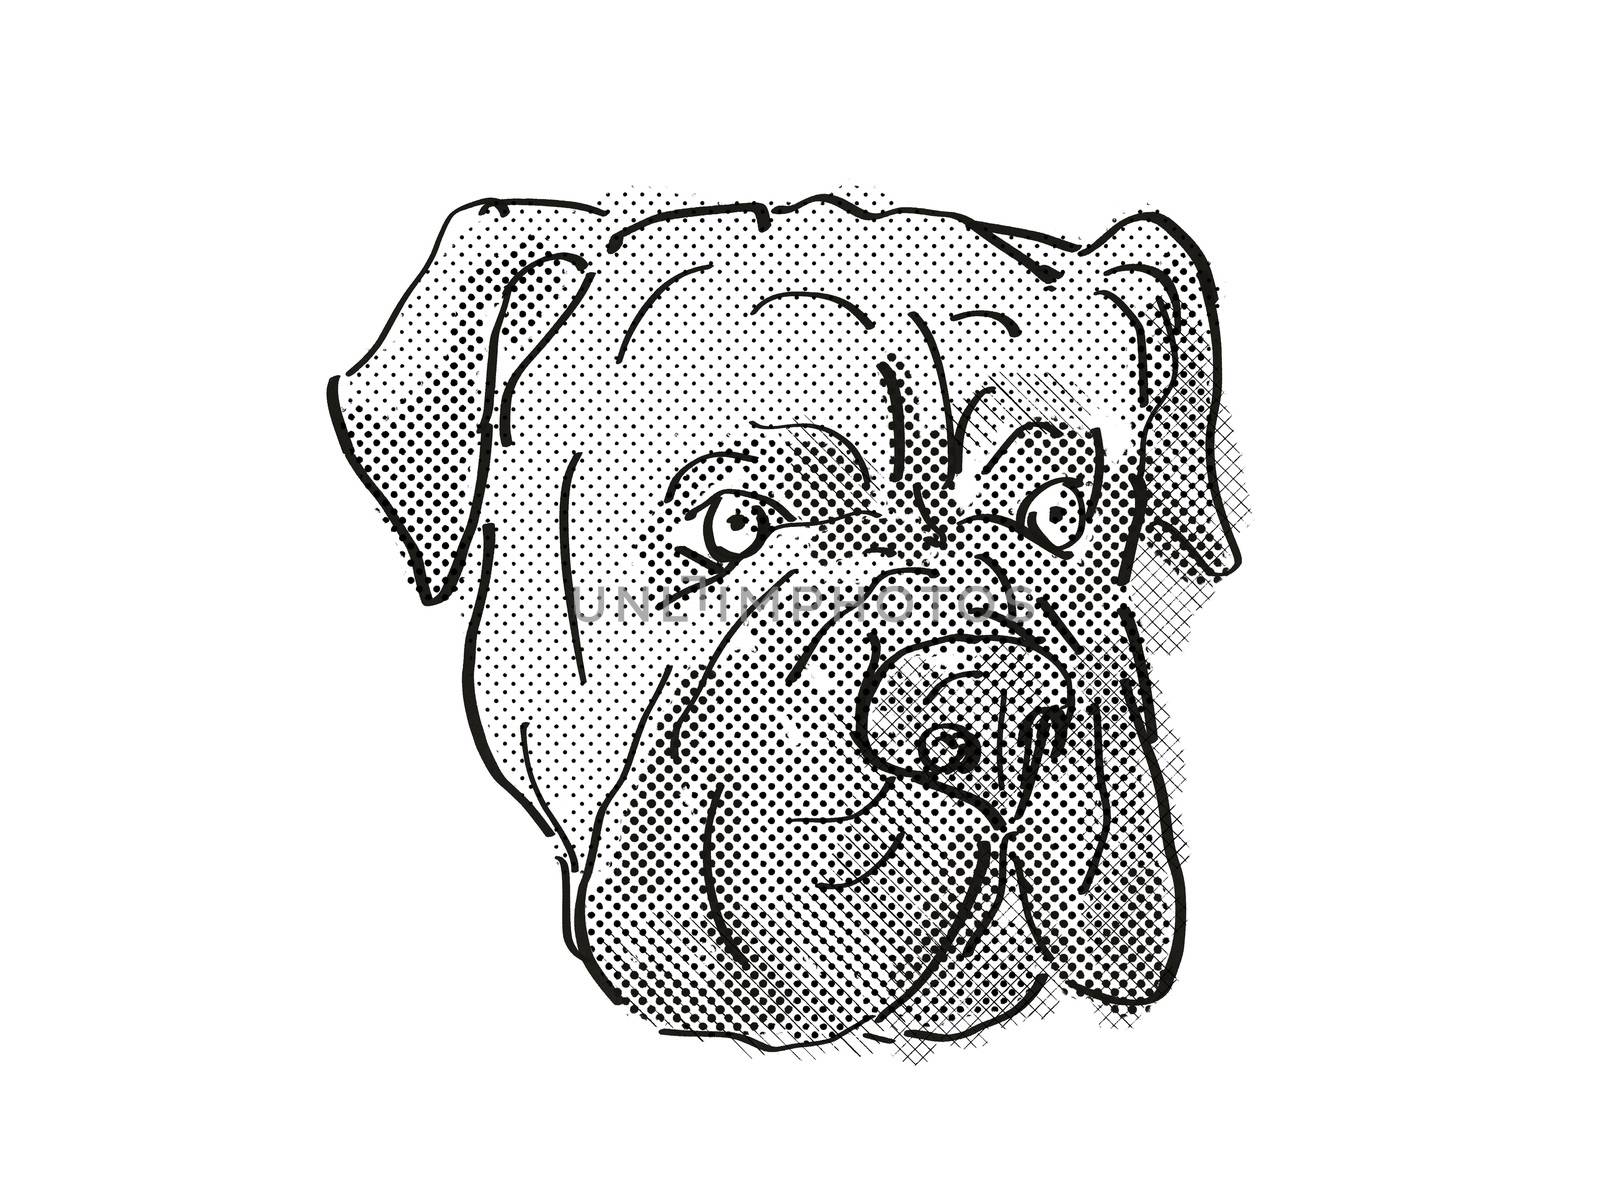 Retro cartoon style drawing of head of a Bullmastiff or silent watchdog, a domestic dog or canine breed on isolated white background done in black and white.